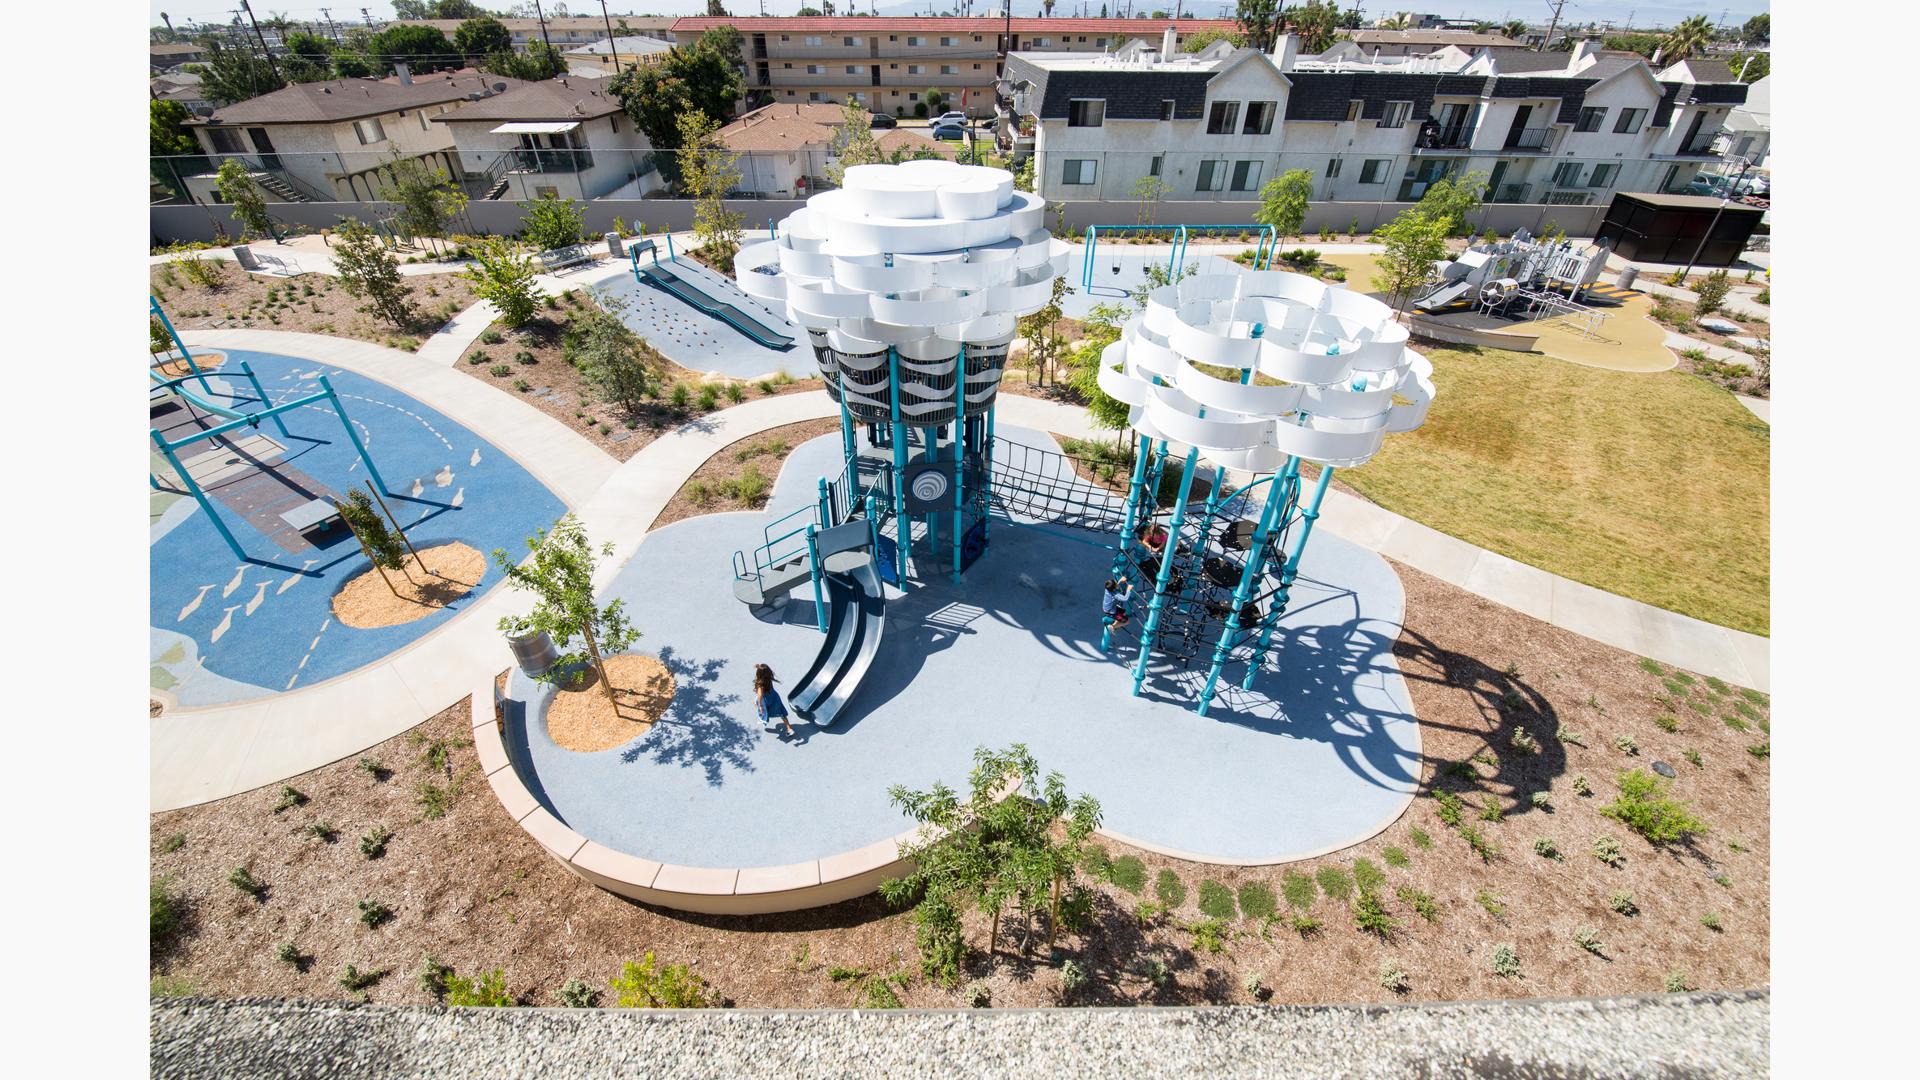 Aerial view of a nature themed playground with large white panels at the top of the two tower stuctures symbolizing large fluffy clouds.